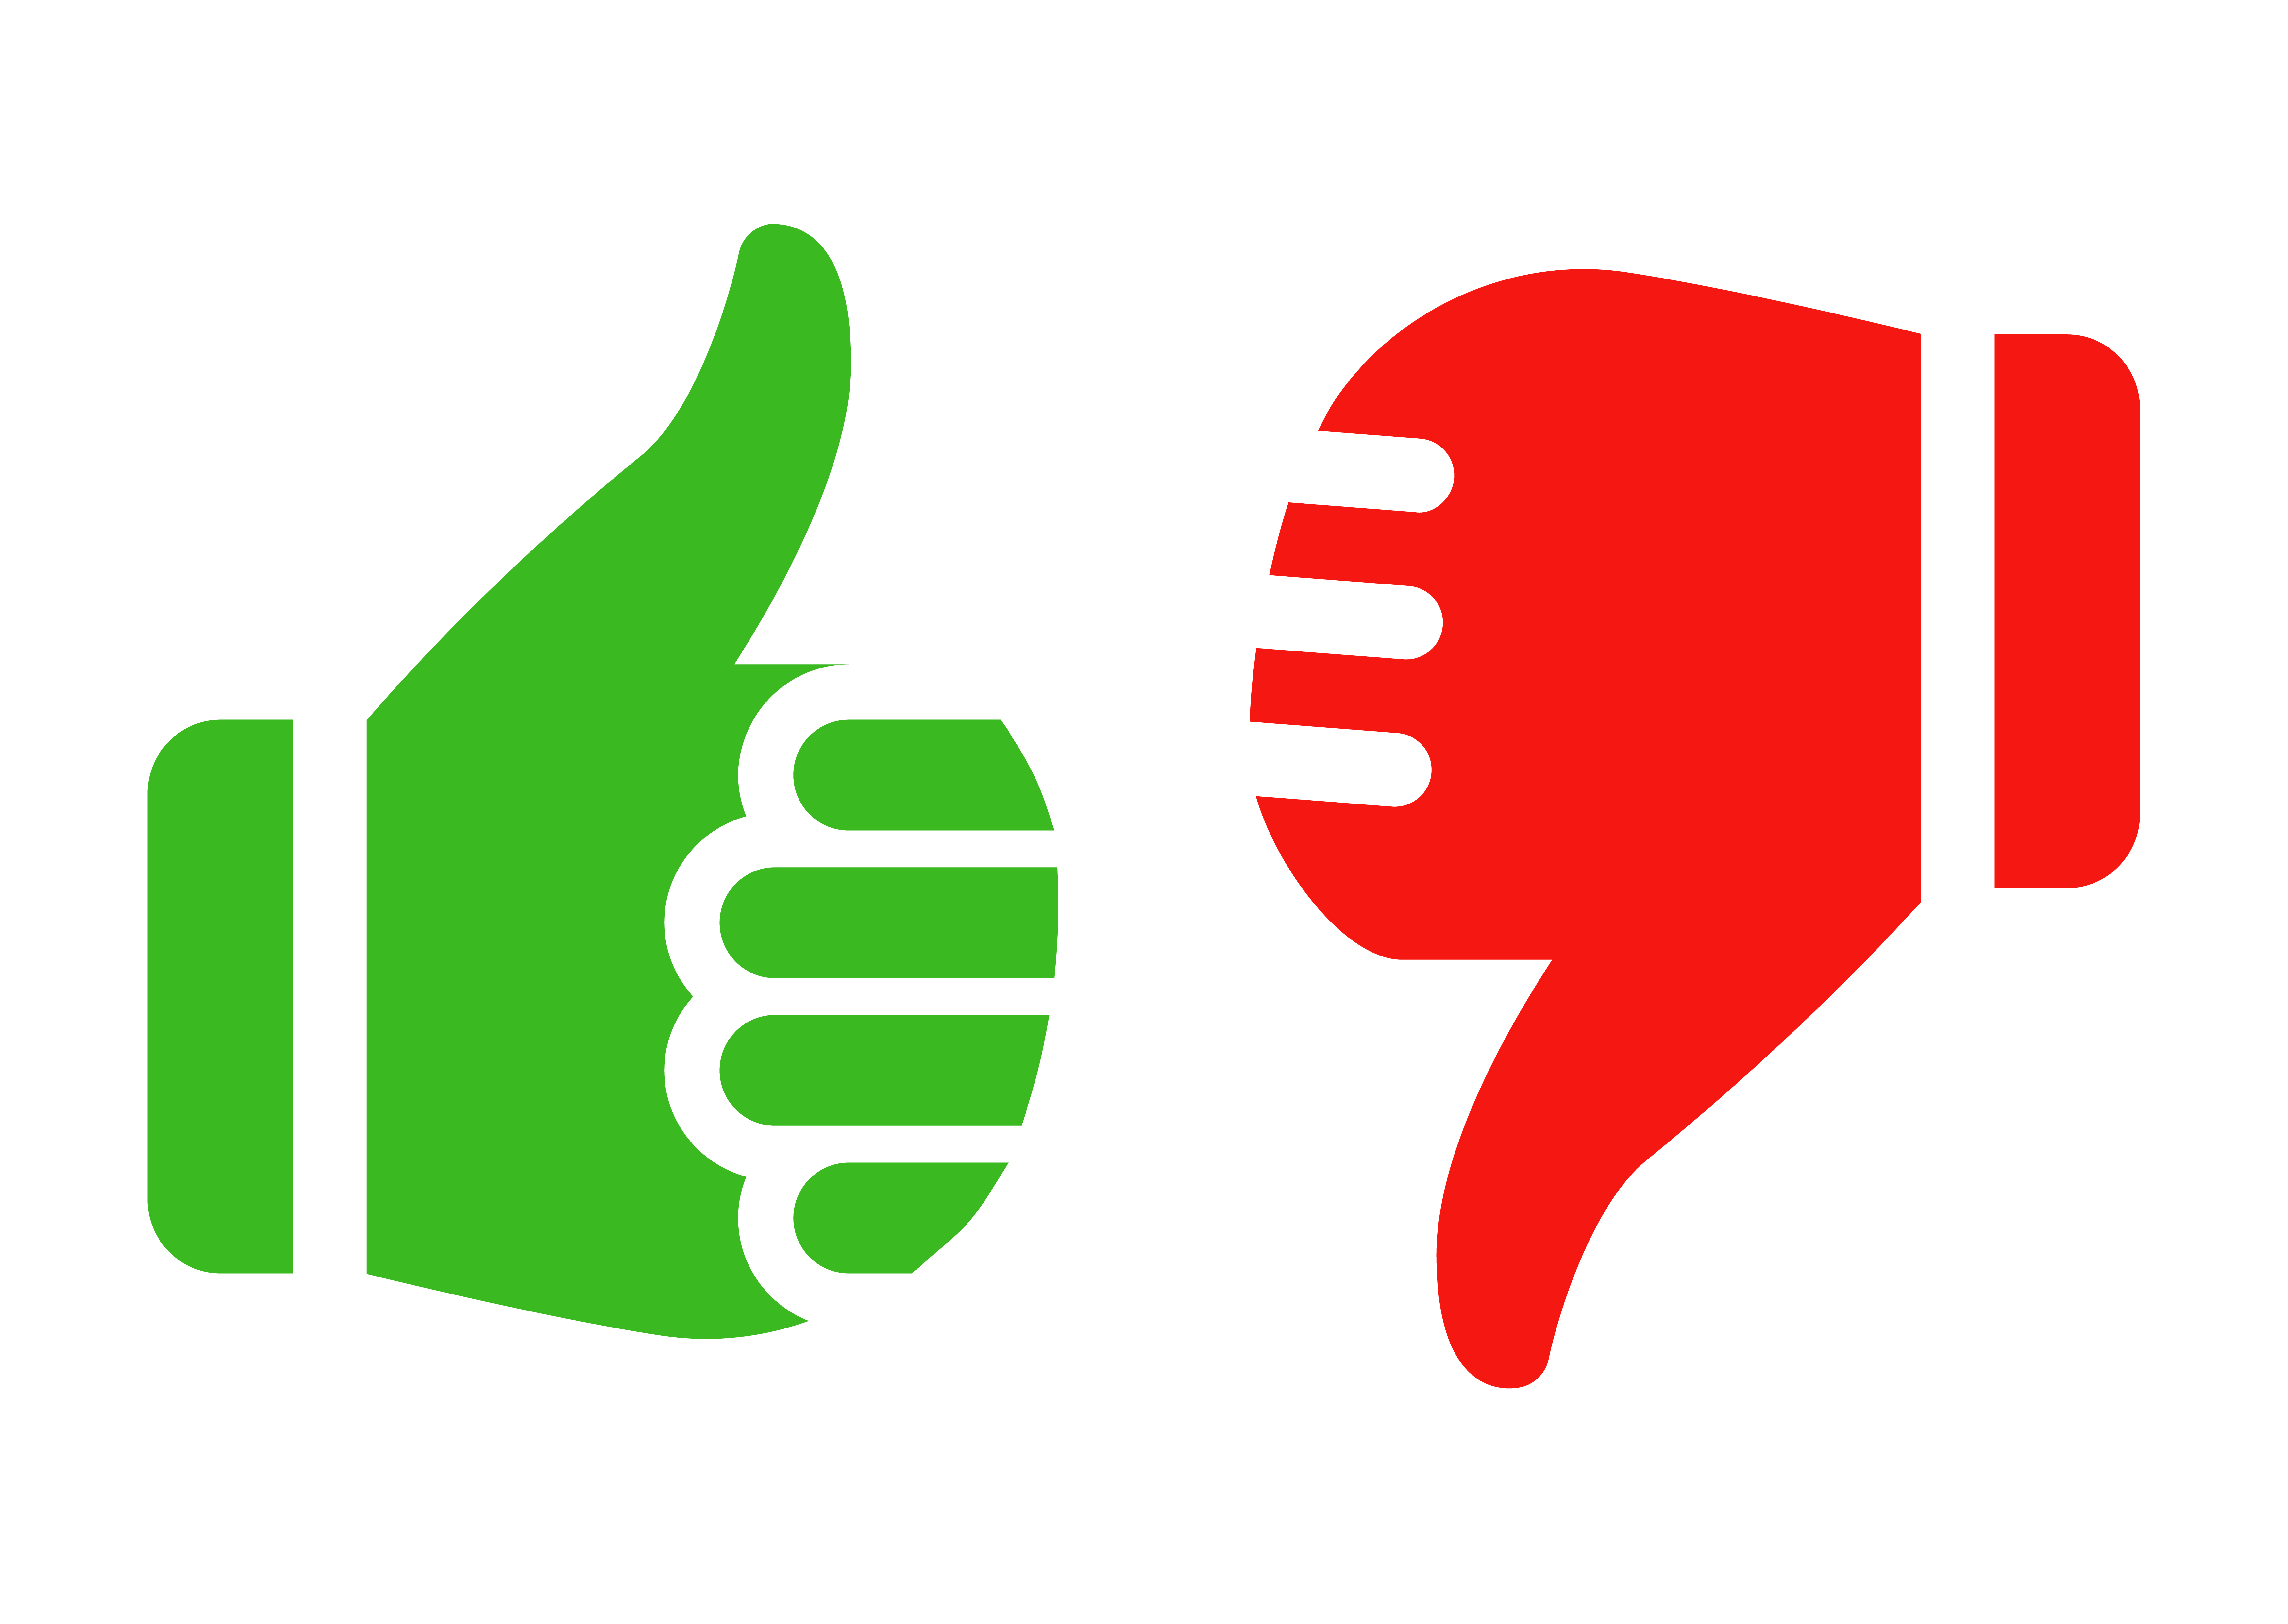 Thumbs up and thumbs down clipart - ClipartFox